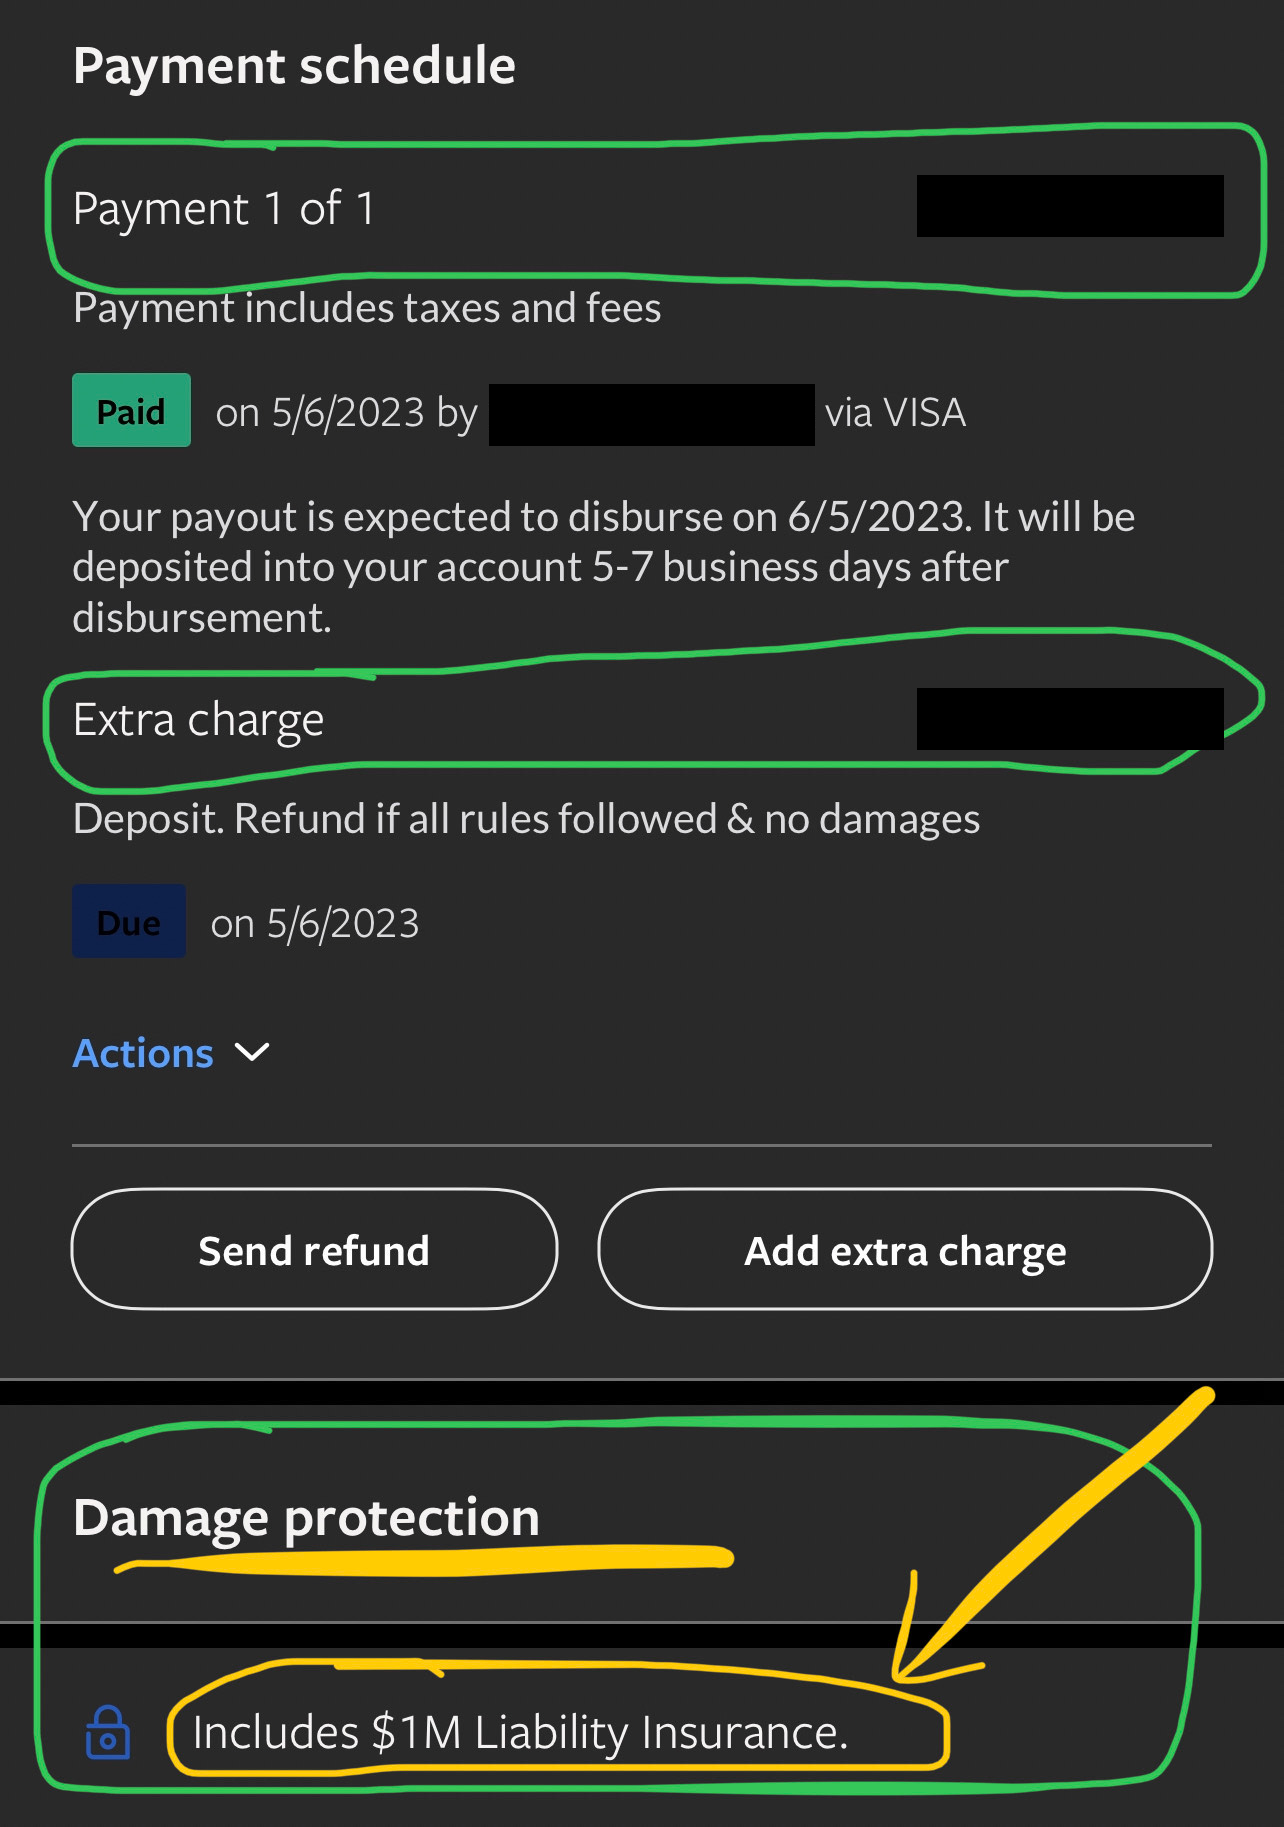 As seen on VRBO's Platform, $1M insurance is listed under Damage Protection